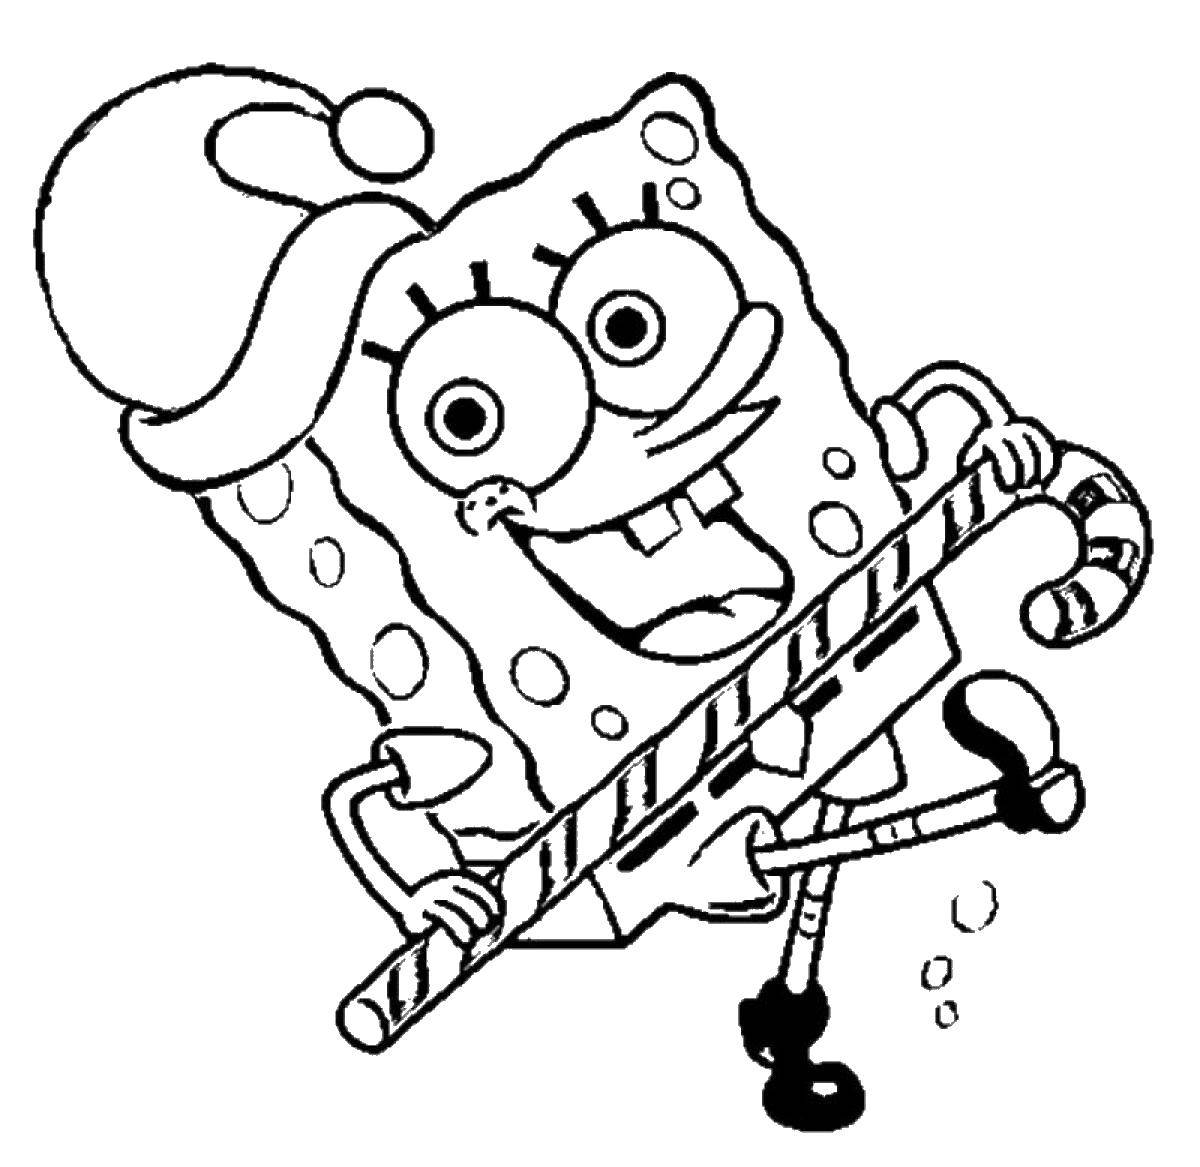 Online coloring pages coloring page christmas spongebob spongebob download print coloring page